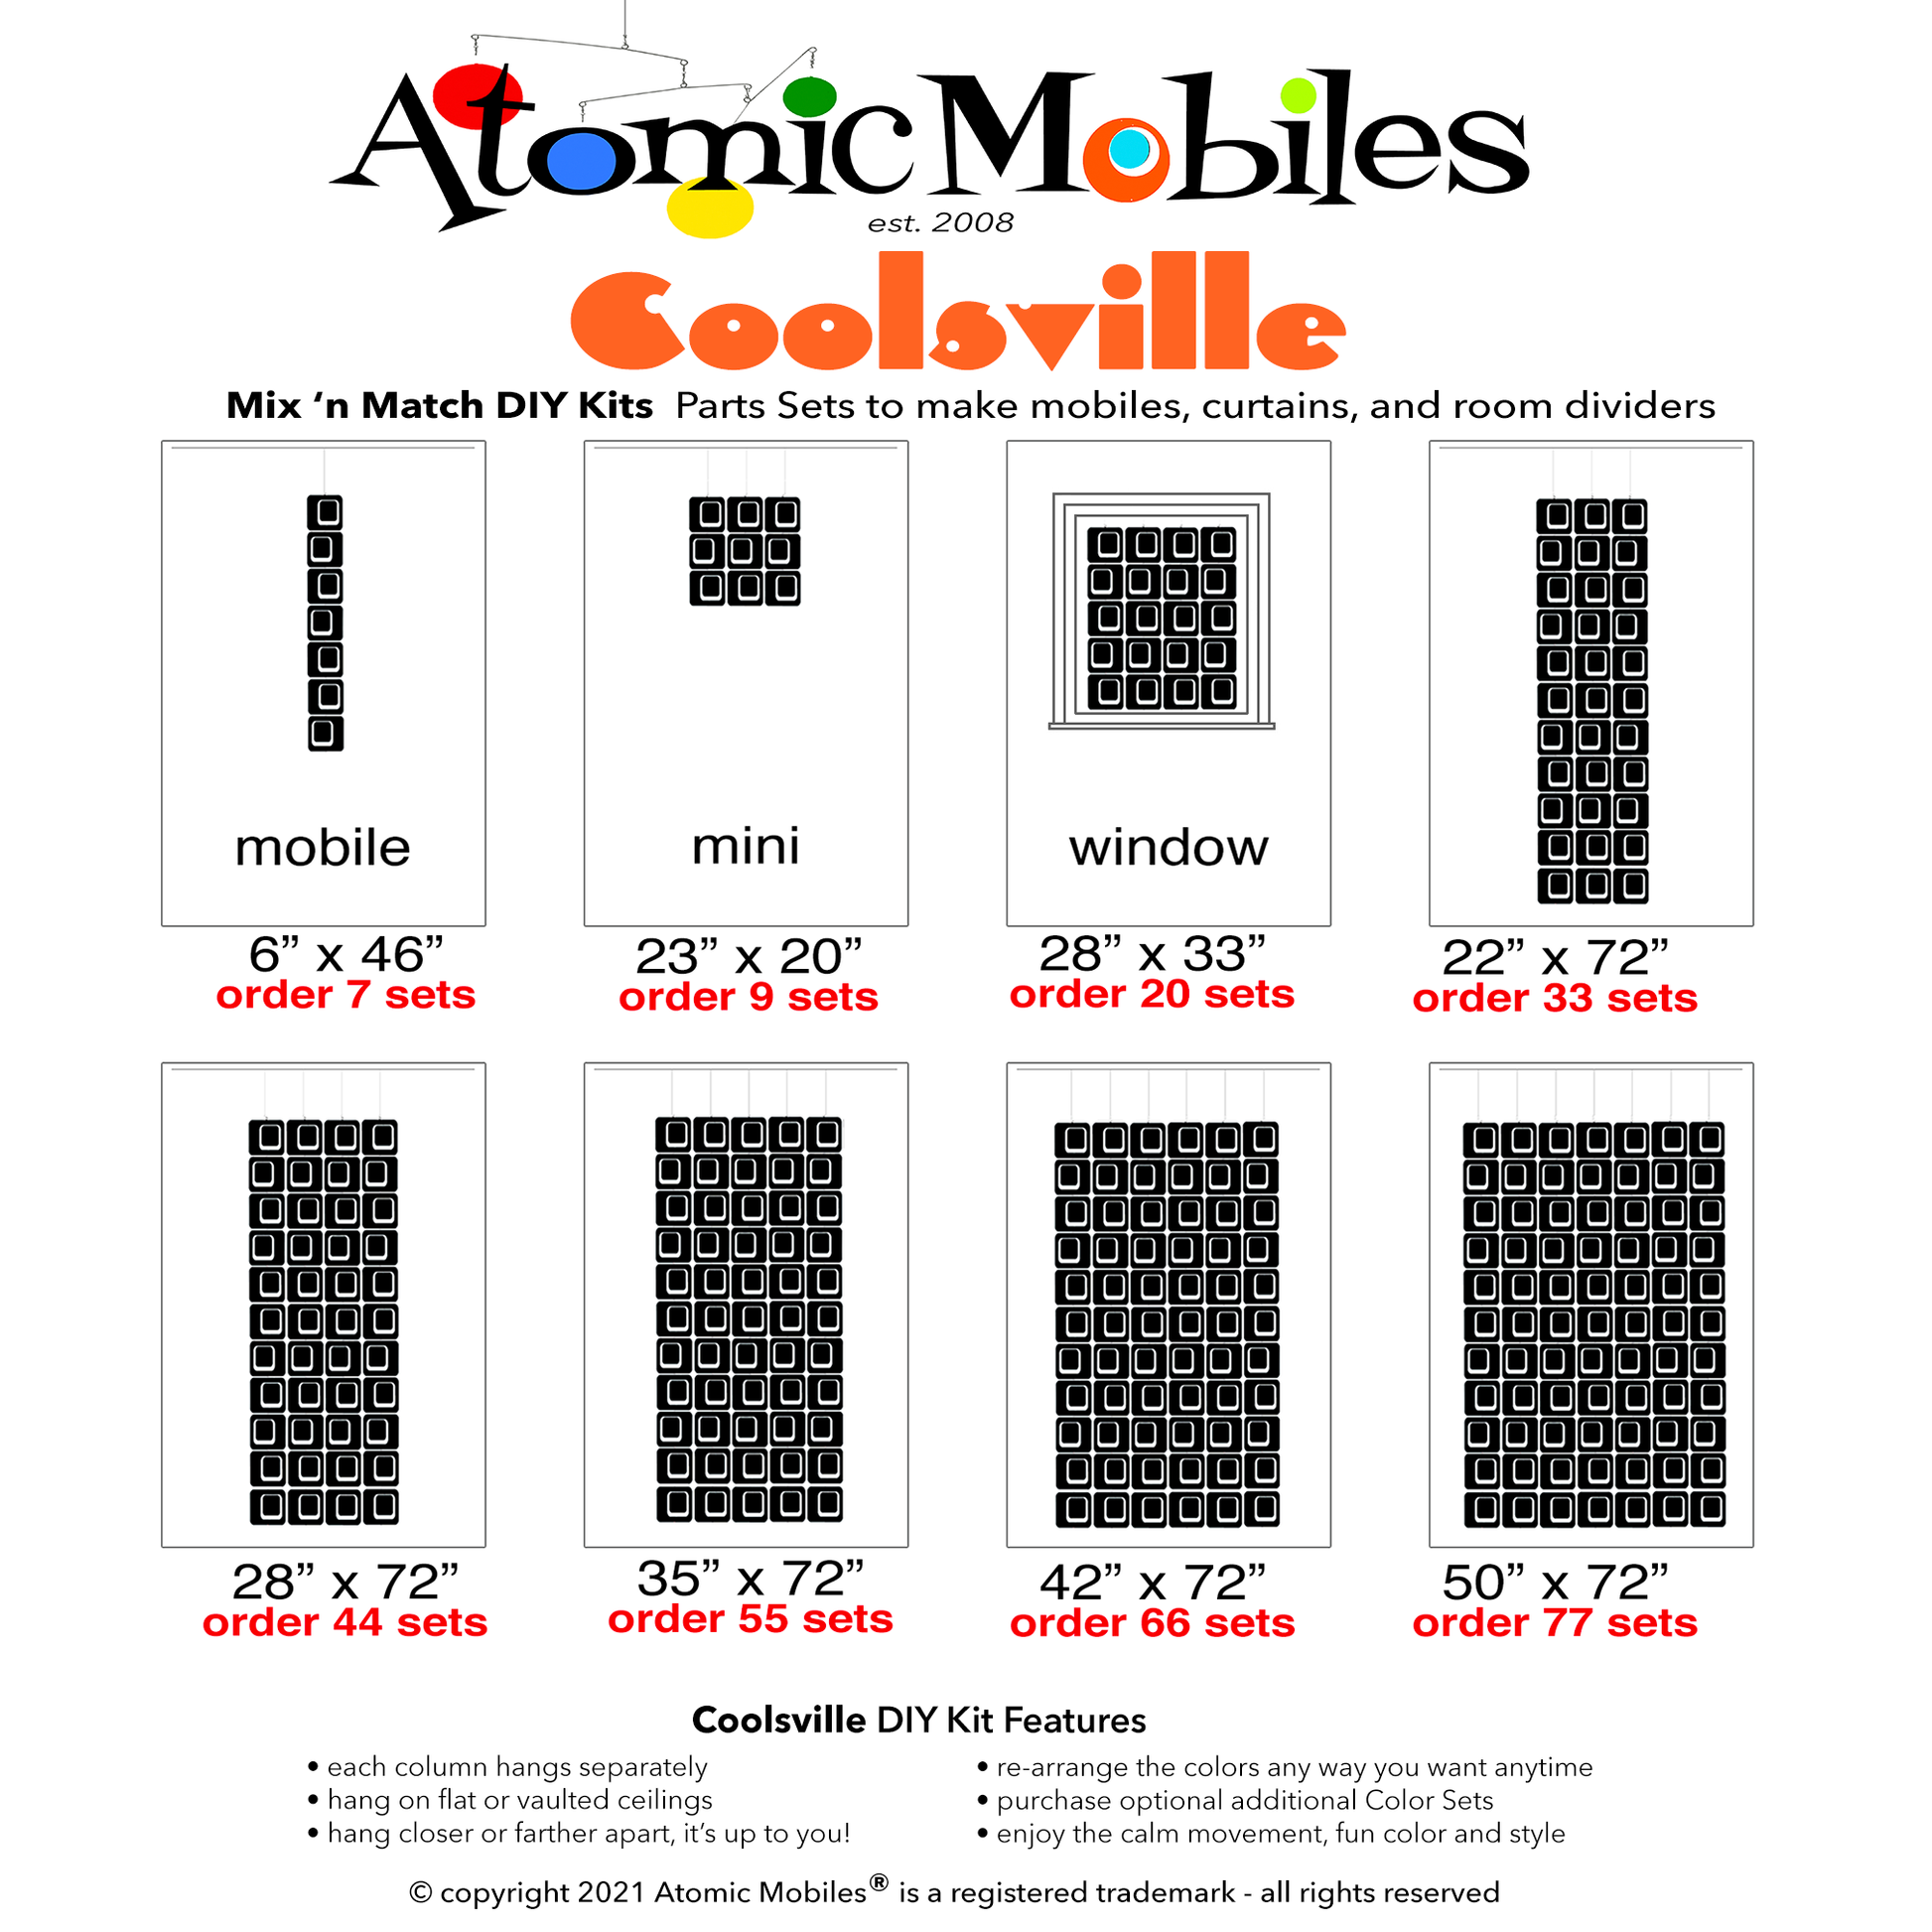 Coolsville Size Chart for mix 'n match DIY kits to make hanging art mobiles, room dividers, and curtains by AtomicMobiles.com